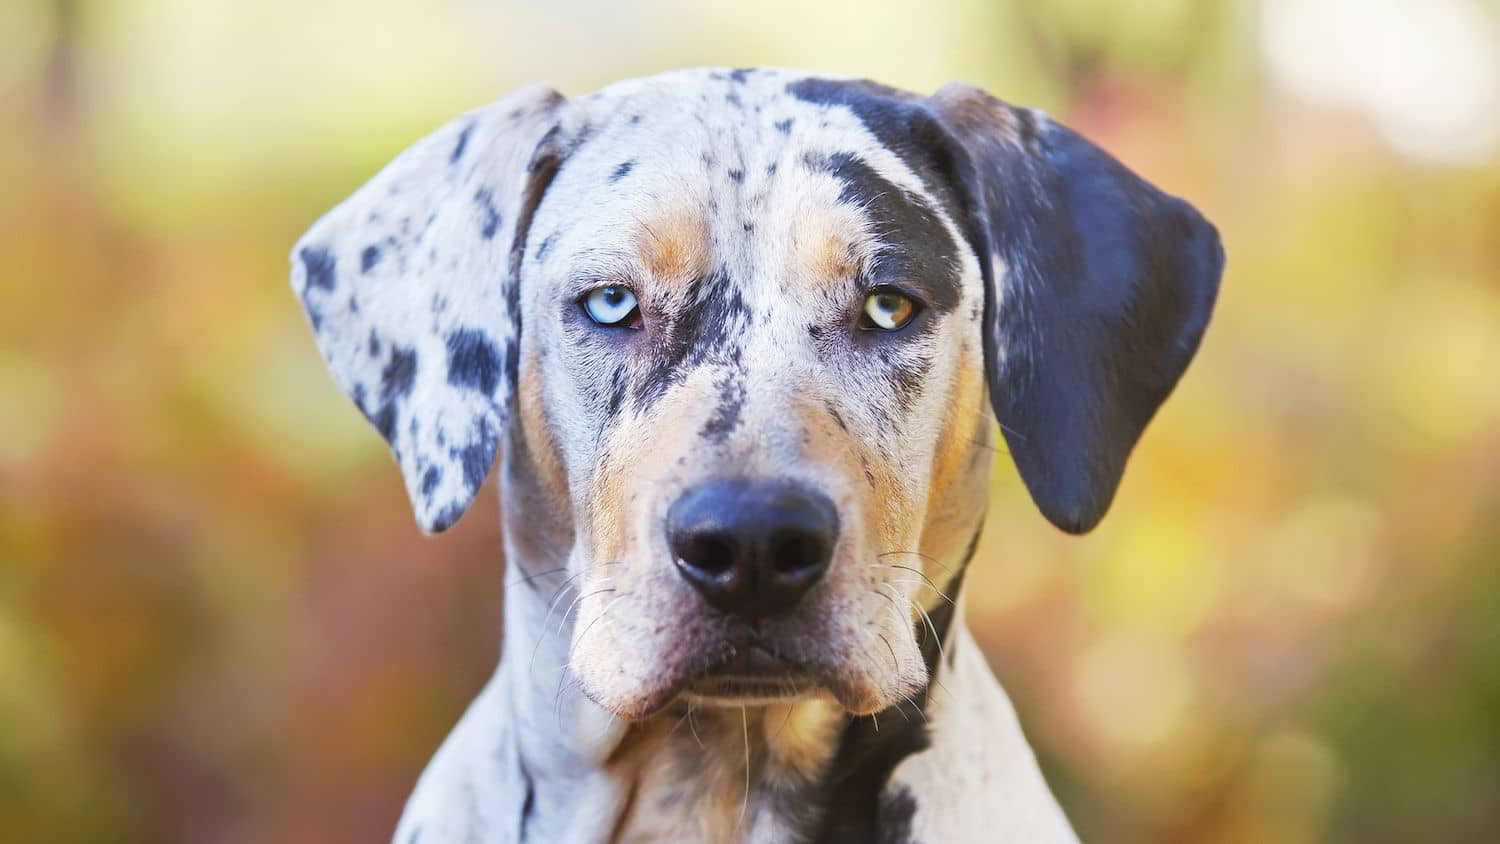 How to Care for a Catahoula Leopard Dog